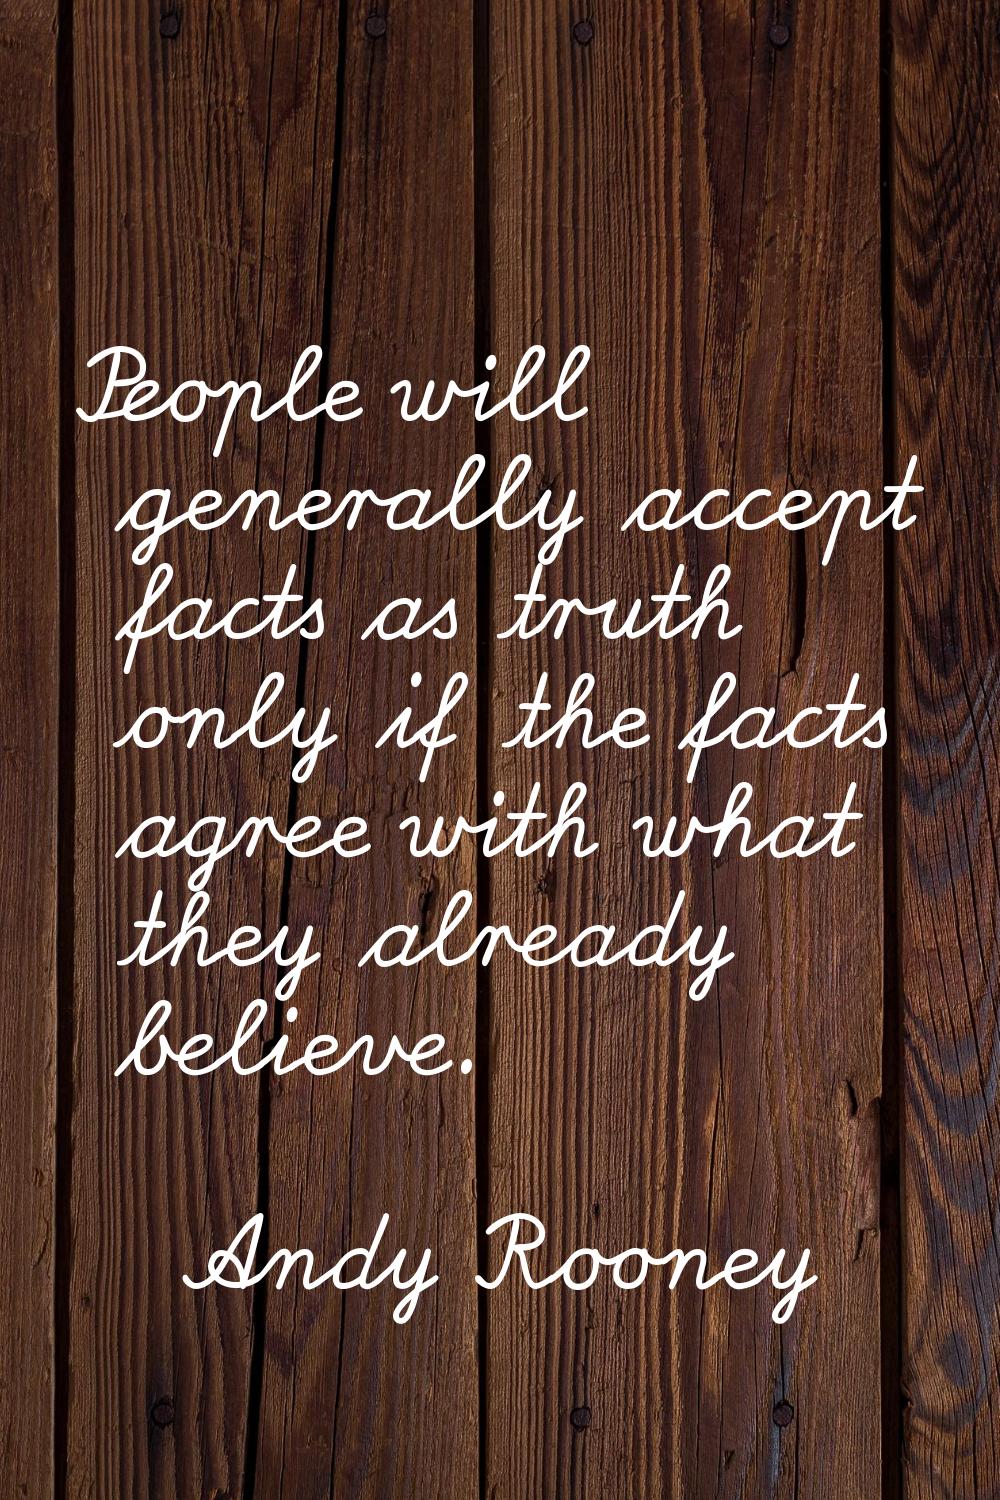 People will generally accept facts as truth only if the facts agree with what they already believe.